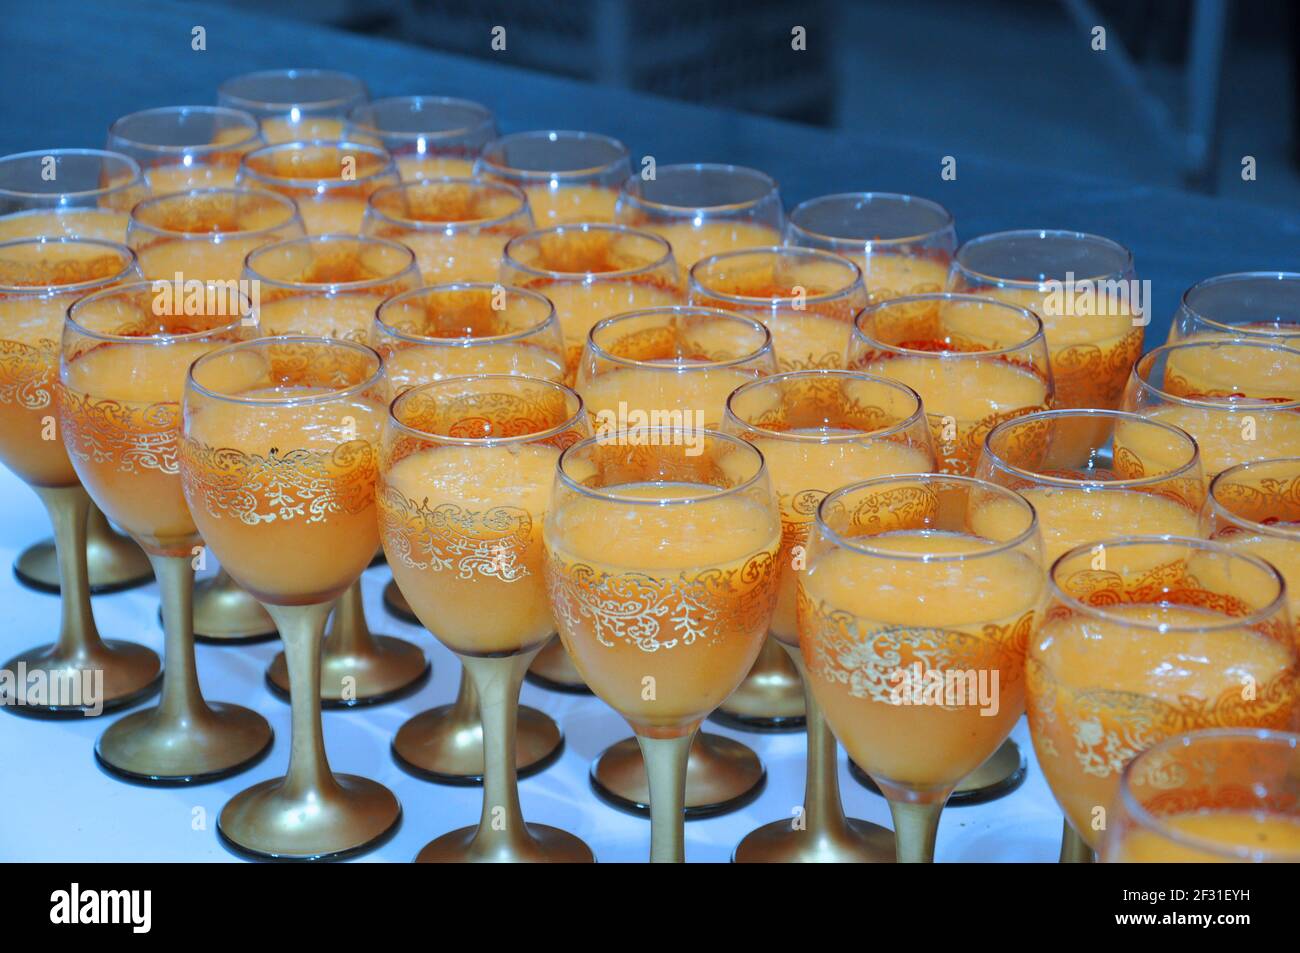 Glasses of orange juice at a wedding party Stock Photo